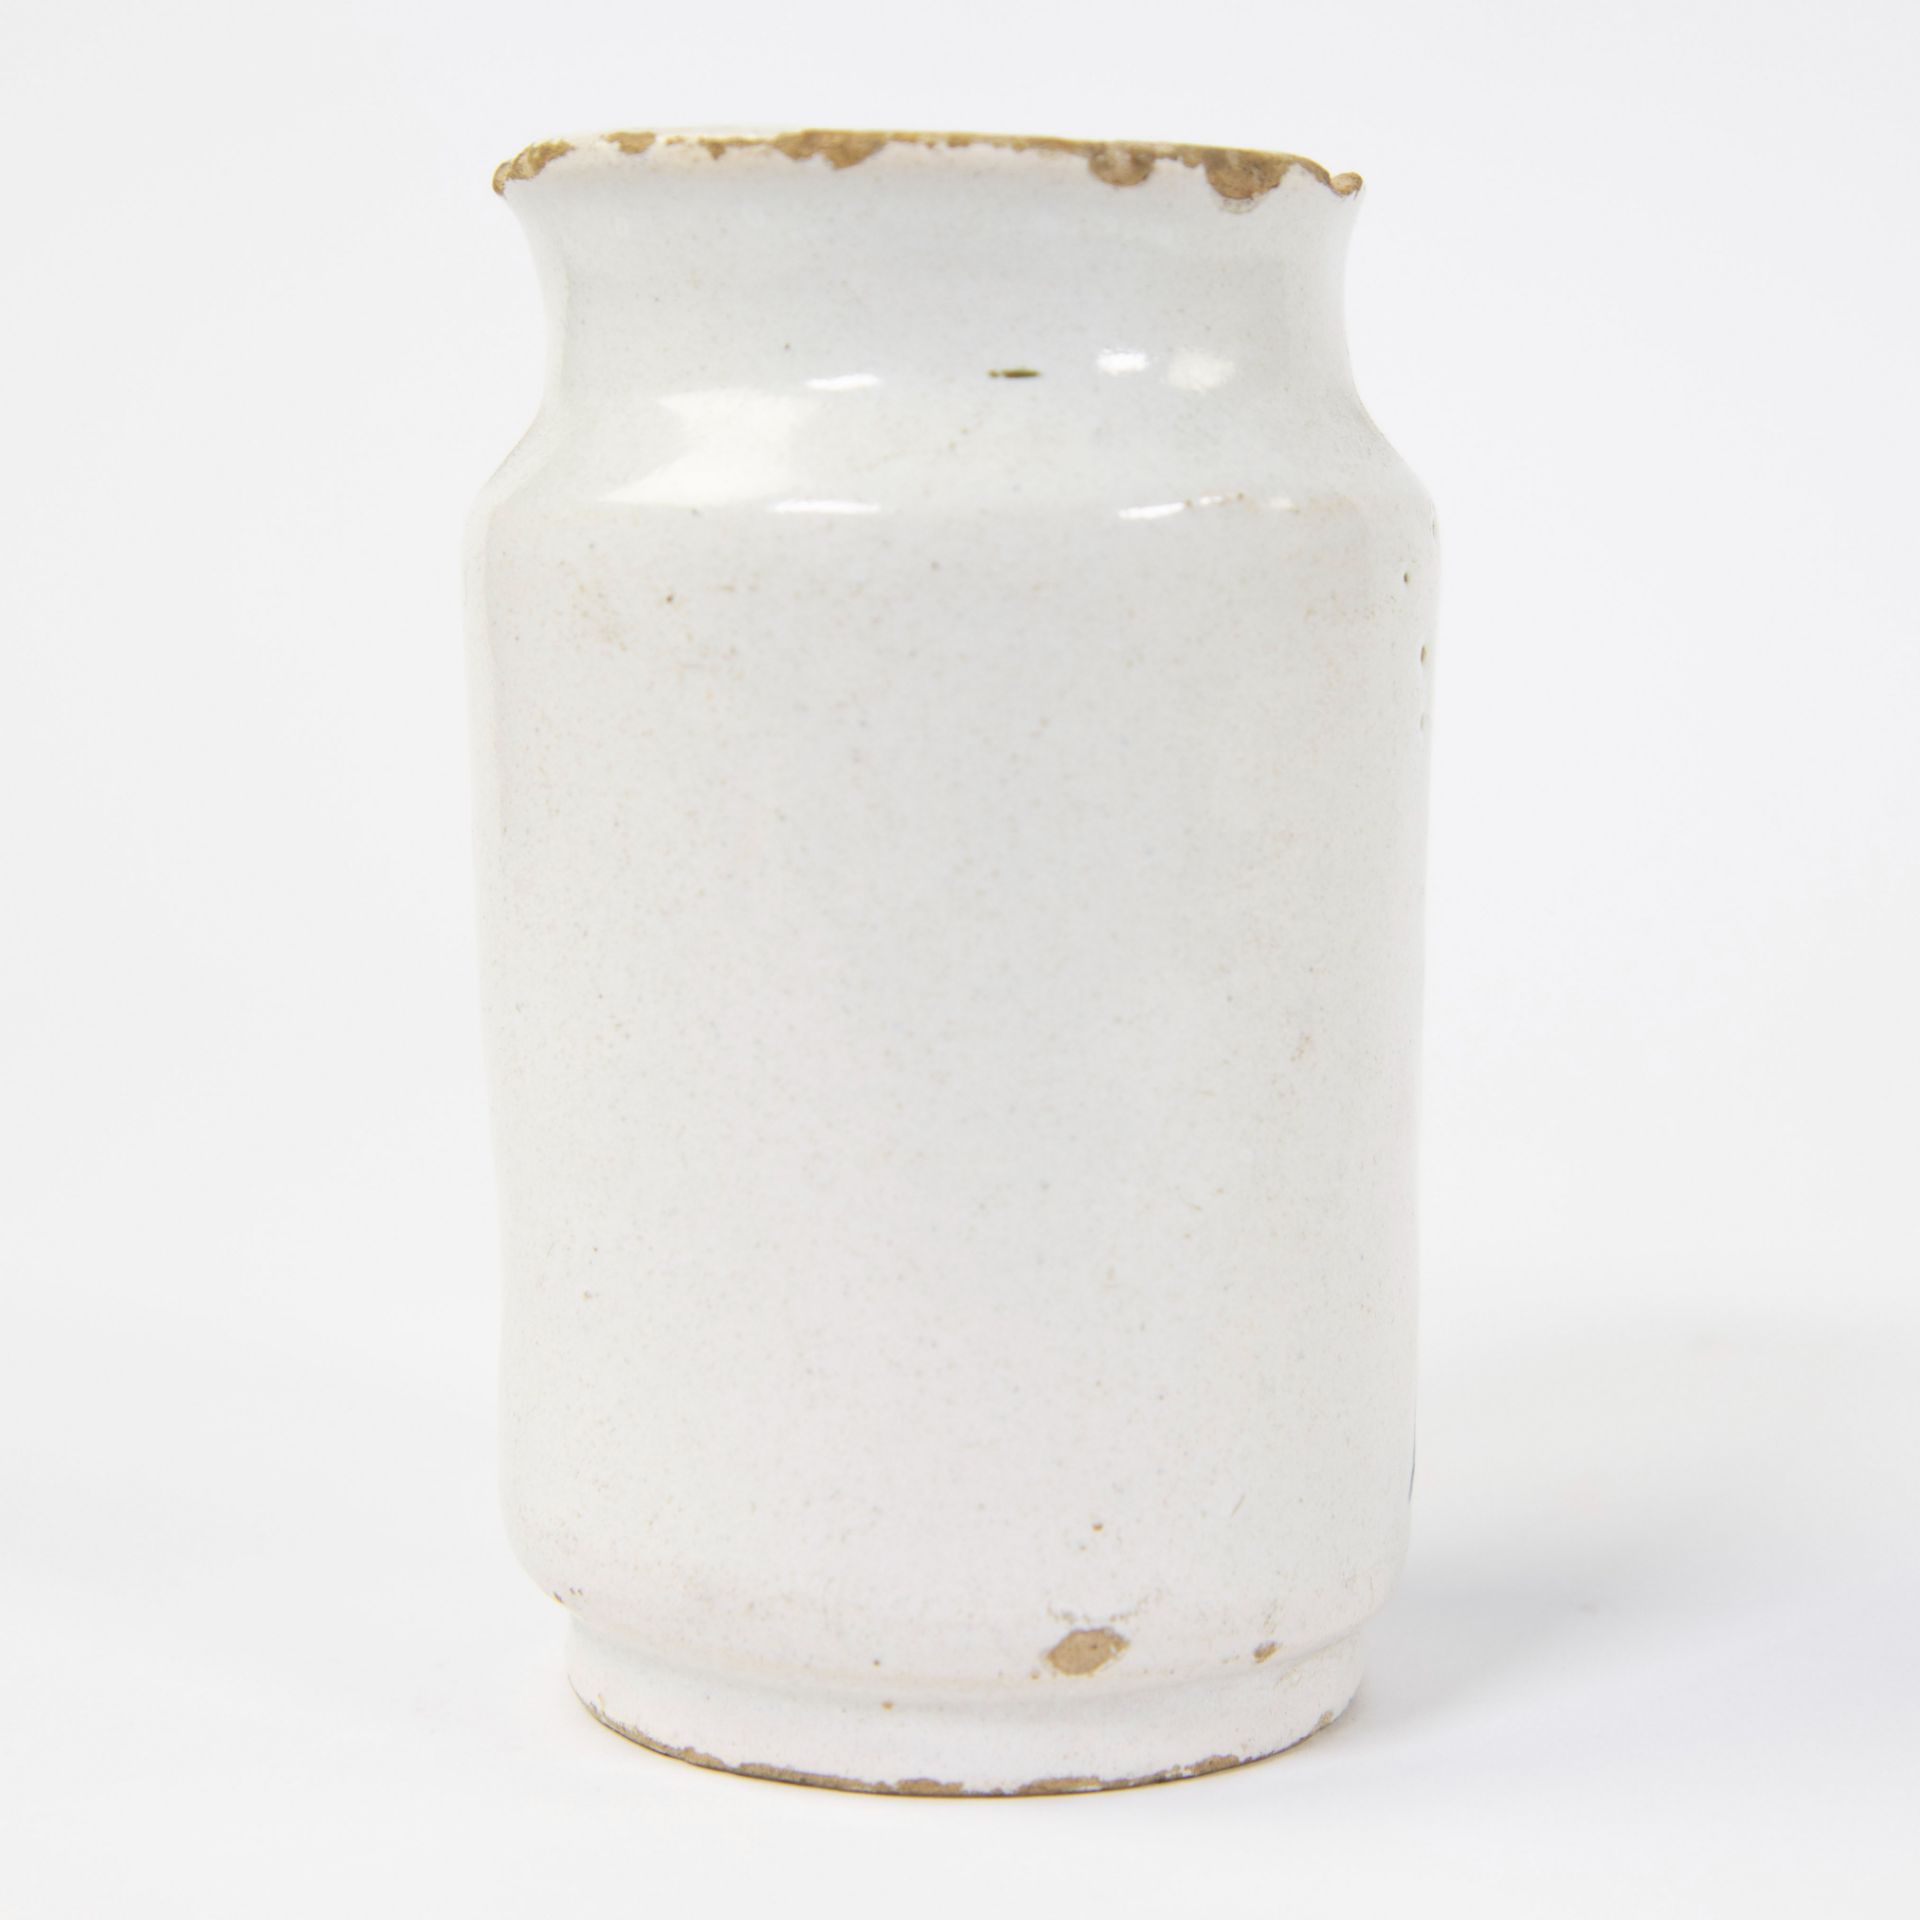 Ointment jar 17th century - Image 3 of 5